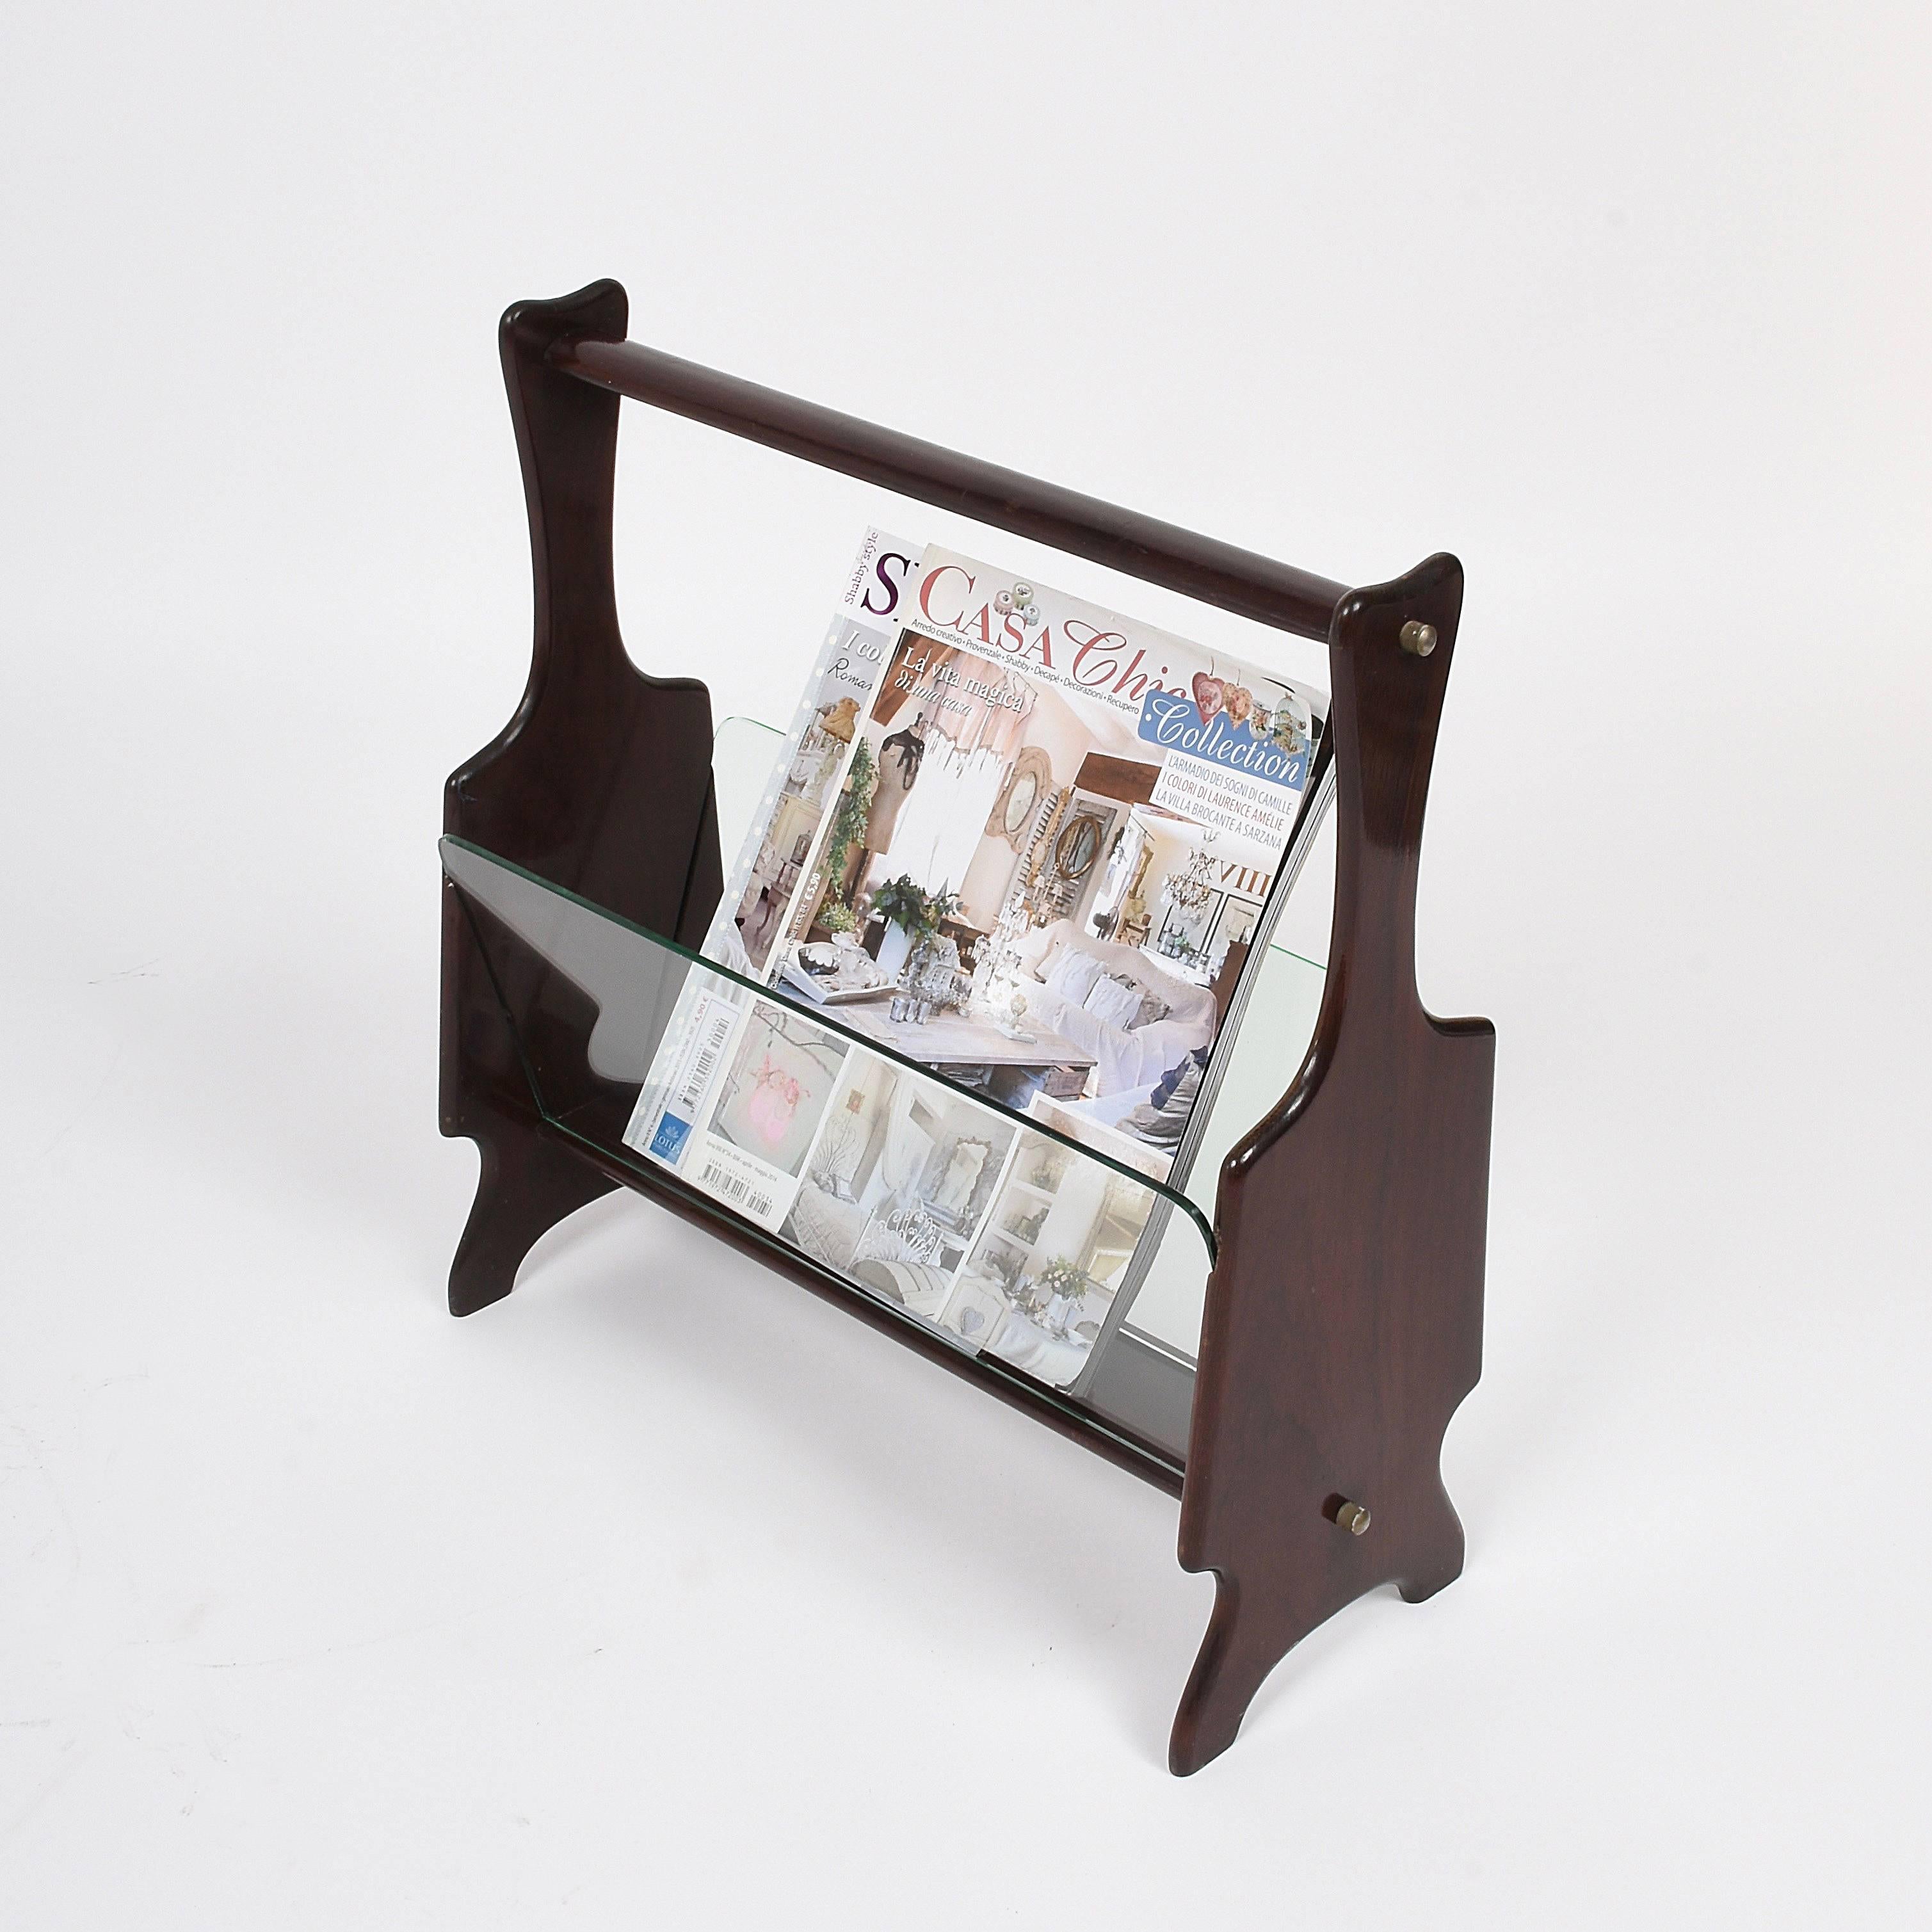 Lovely Italian magazine rack attributed to Ico Parisi. Manufactured in the 1950s. Made of lacquered mahogany wood with glass side panels and visible brass screws